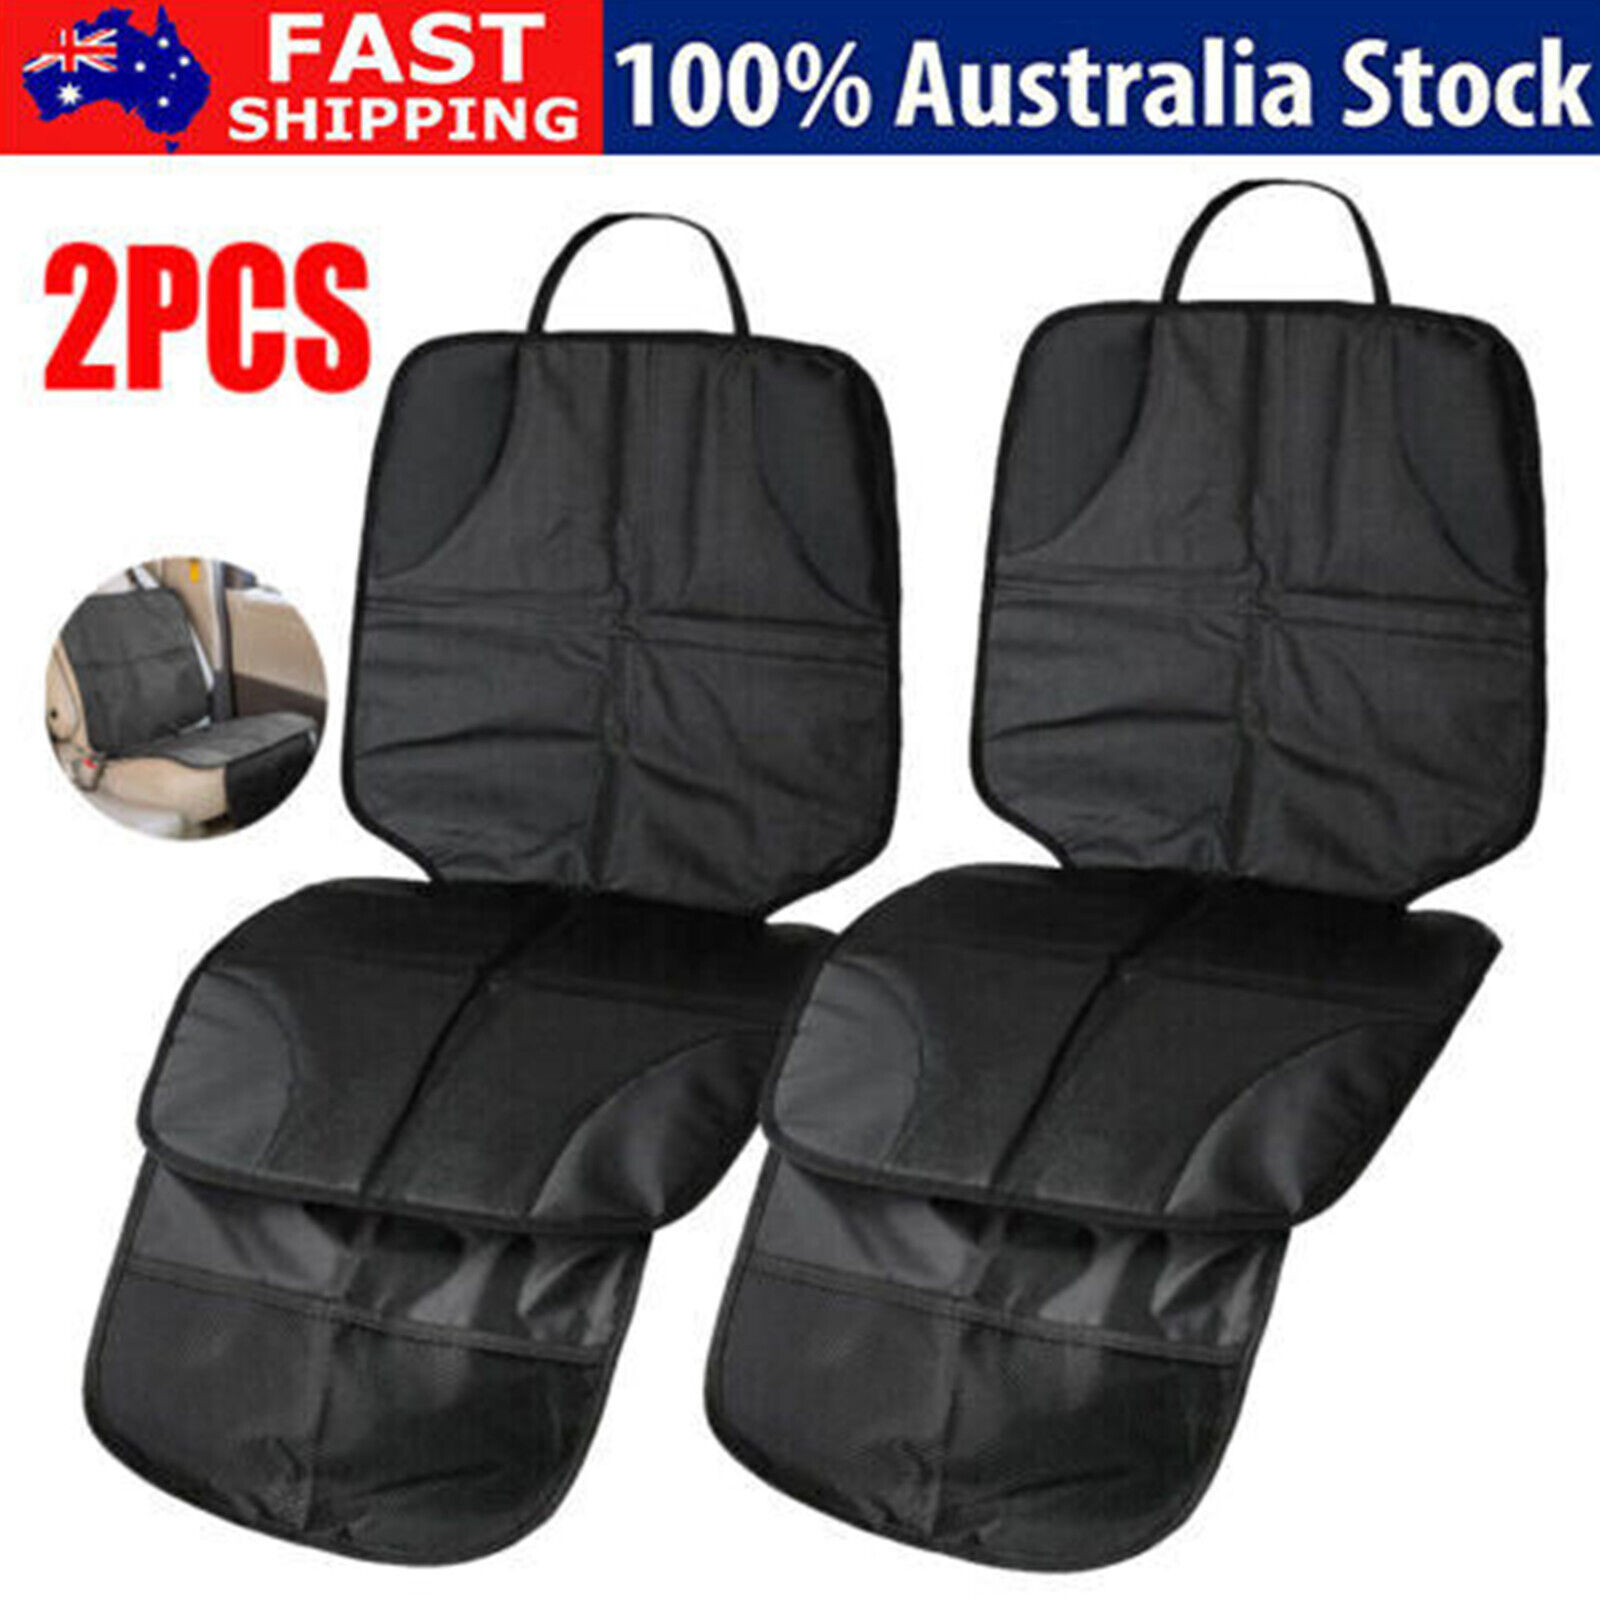 2X Extra Large Car Baby Seat Protector Cover Cushion Waterproof Anti-Slip Safety